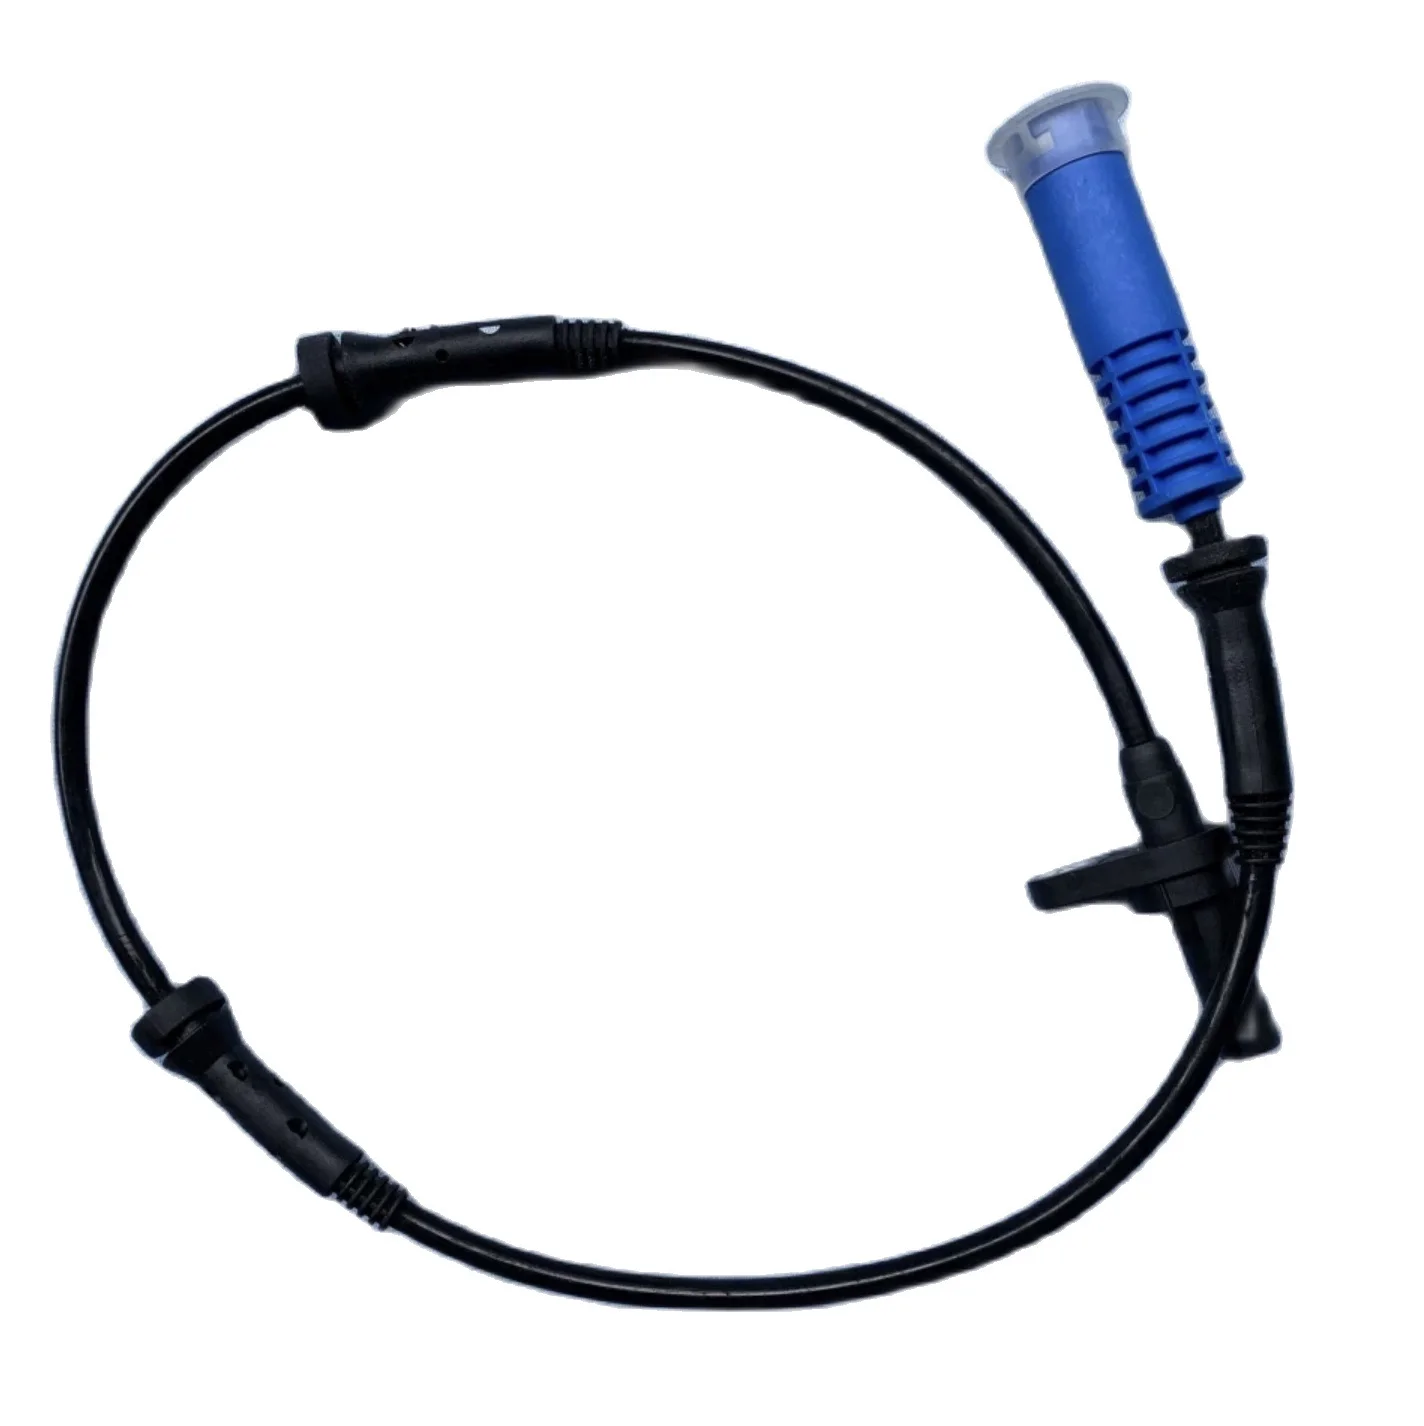 34526771702 FRONT LEFT RIGHT ABS WHEEL SPEED SENSOR FOR 5 6 SERIES ORIGINAL PARTS for super soco ts tc tc max electric motorcycle original rotary handle left and right combination switch buttons